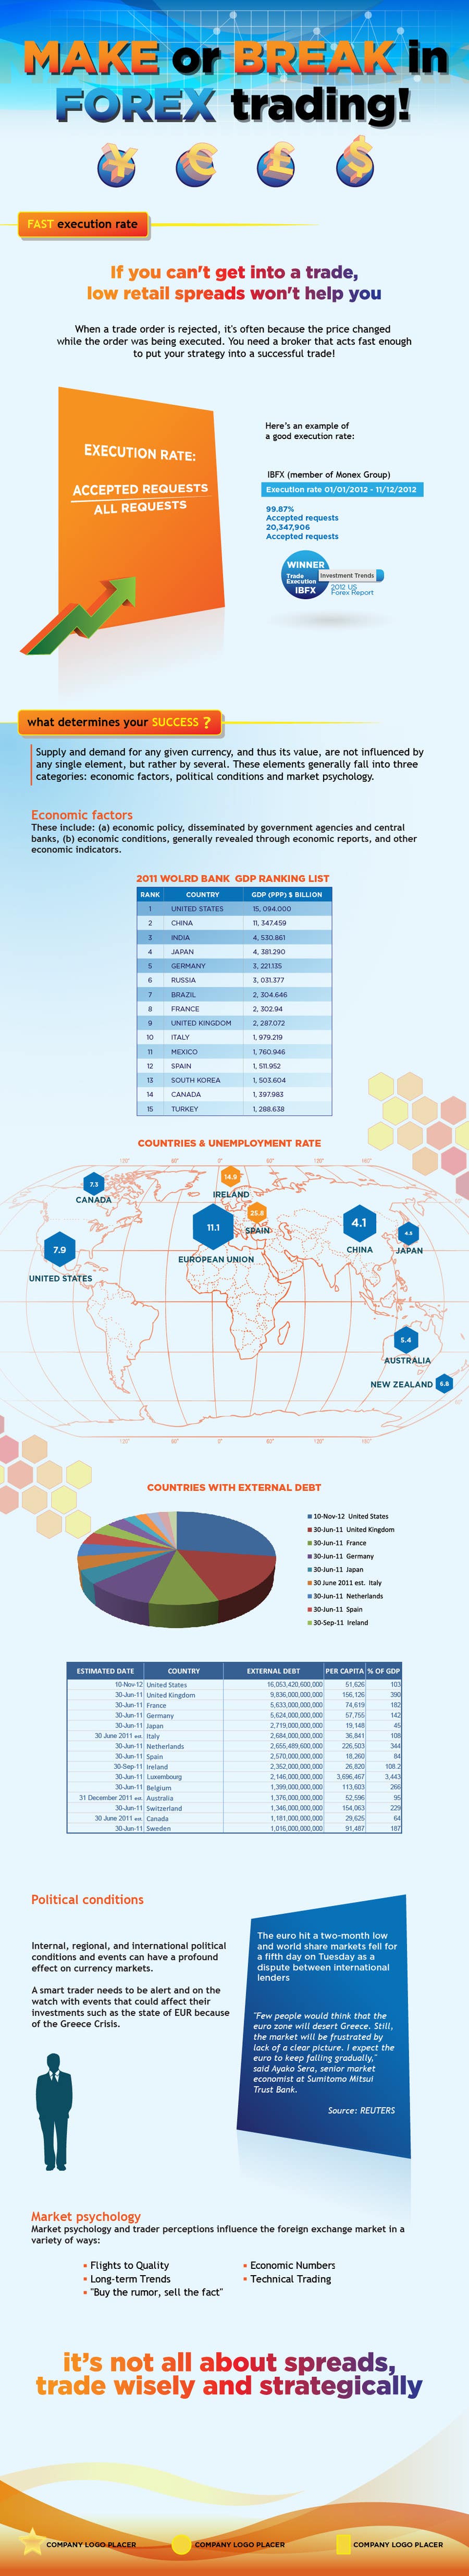 Konkurrenceindlæg #20 for                                                 Infographic creation: Influences on foreign exchange market (forex) trading
                                            